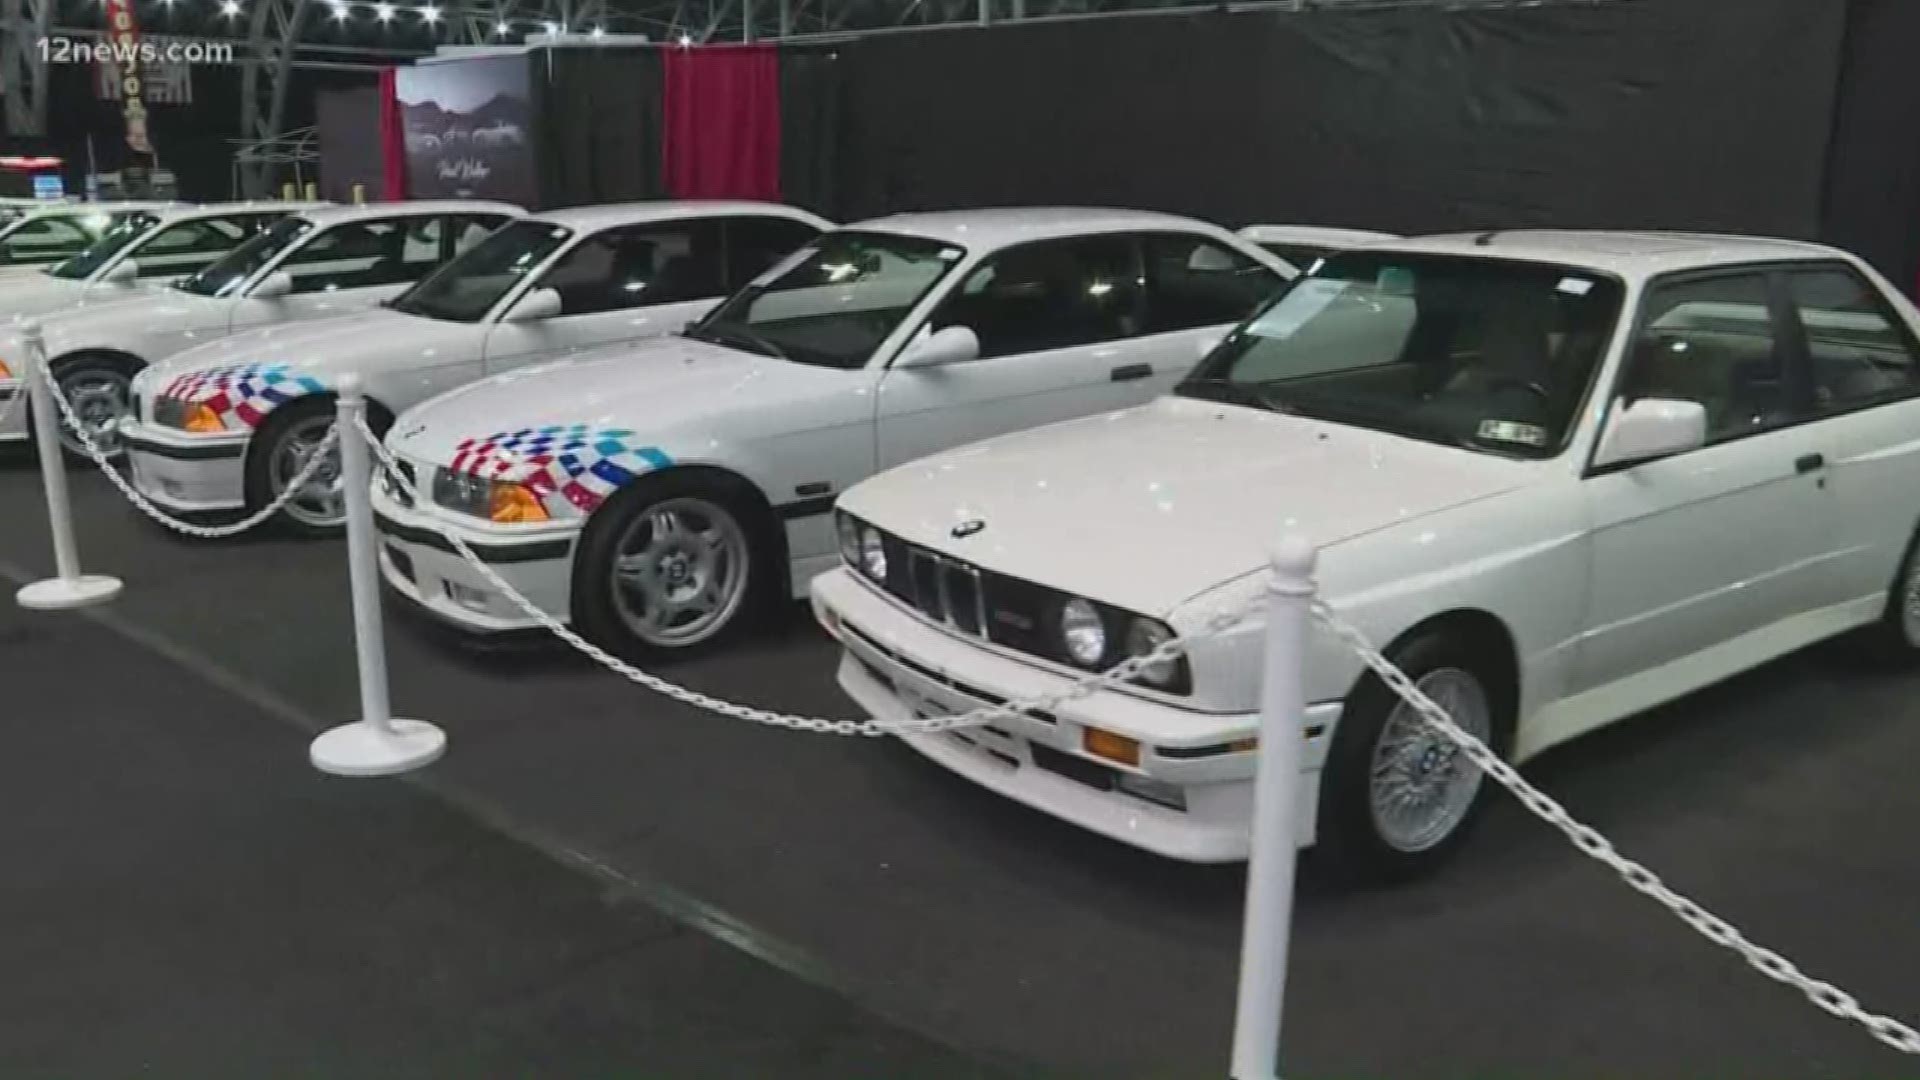 21 vehicles owned by late actor Paul Walker are being auctioned off at Barrett-Jackson's 49th Annual Scottsdale Auction.